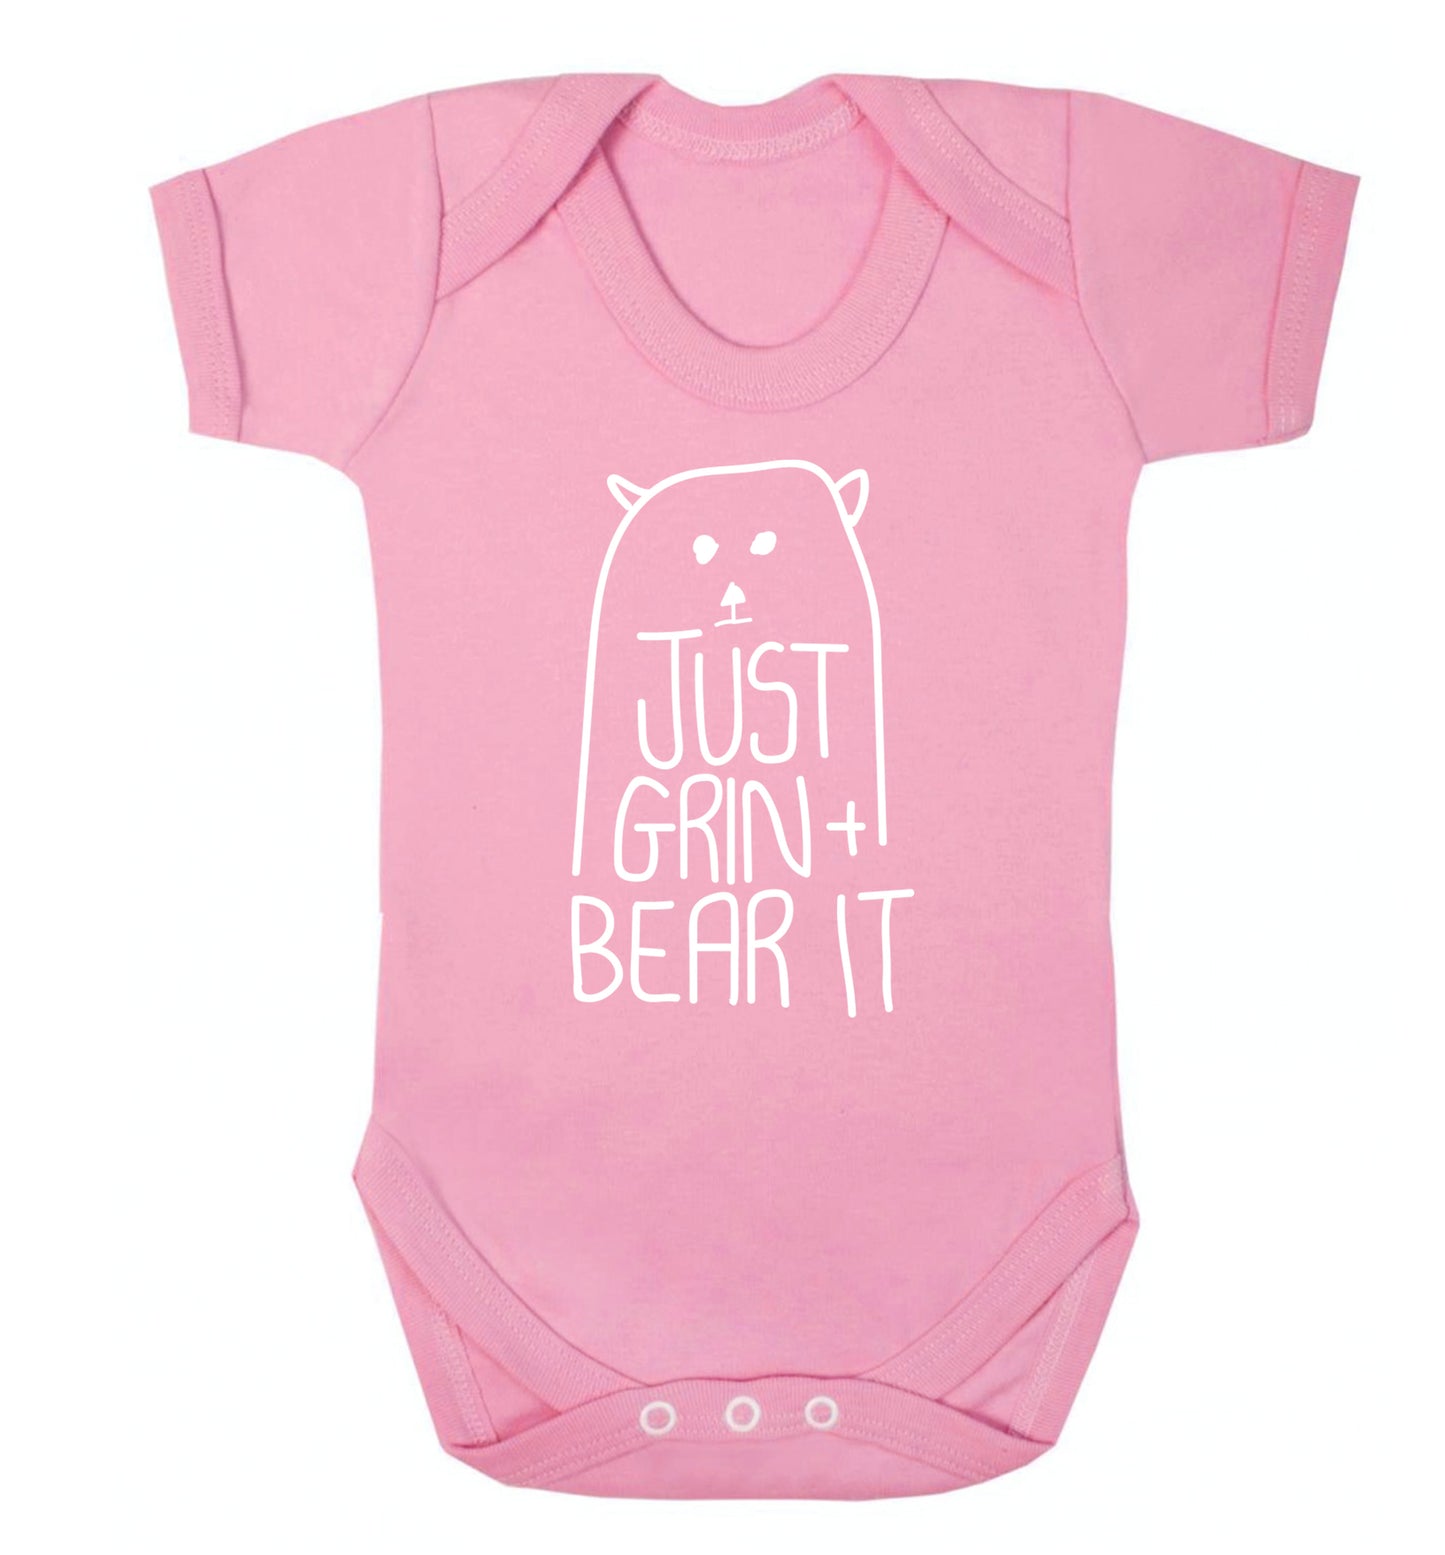 Just grin and bear it Baby Vest pale pink 18-24 months